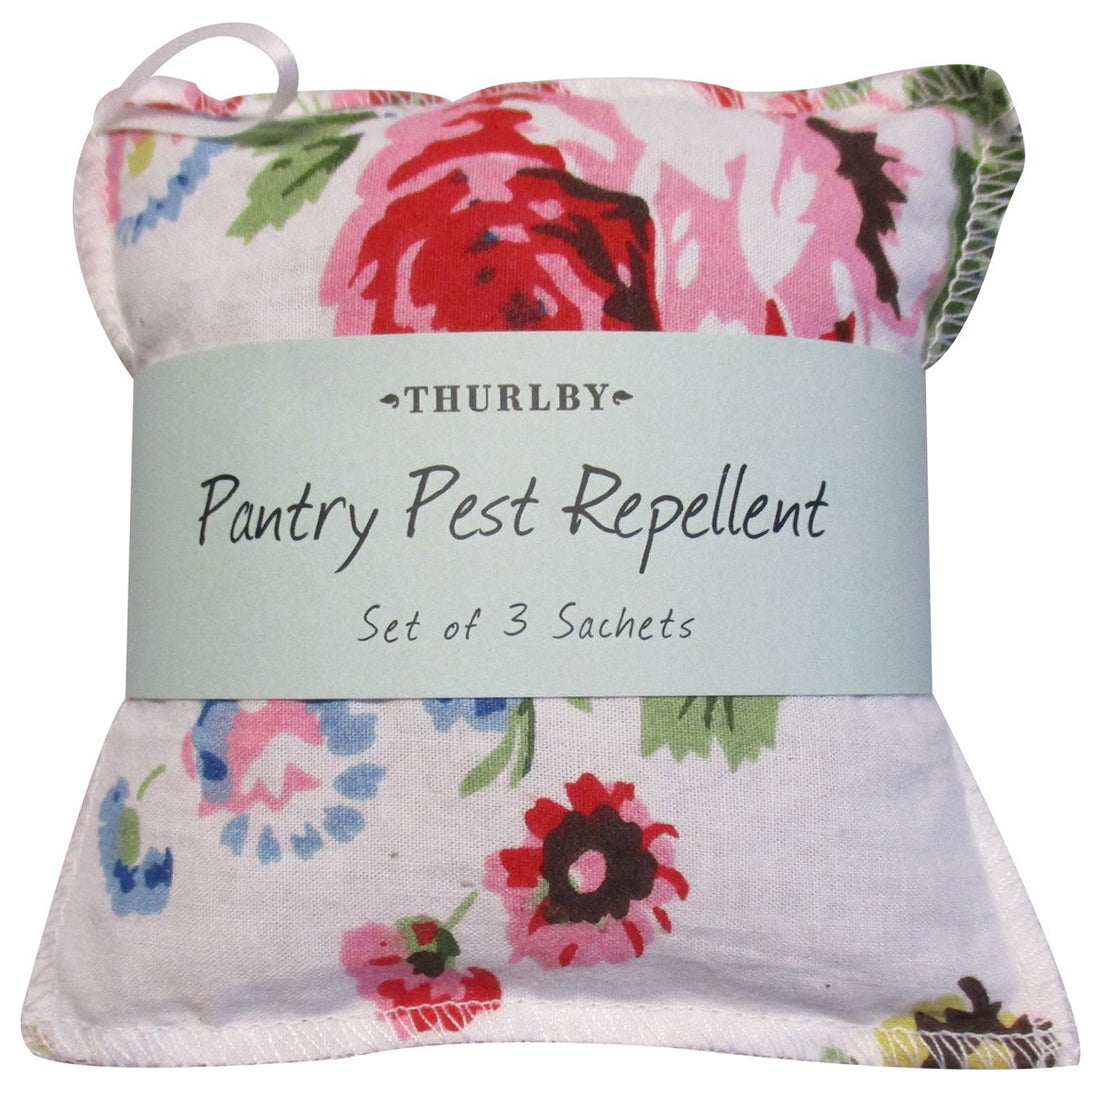 Thurlby Bloom Pantry Pest Repellent - Set of 3